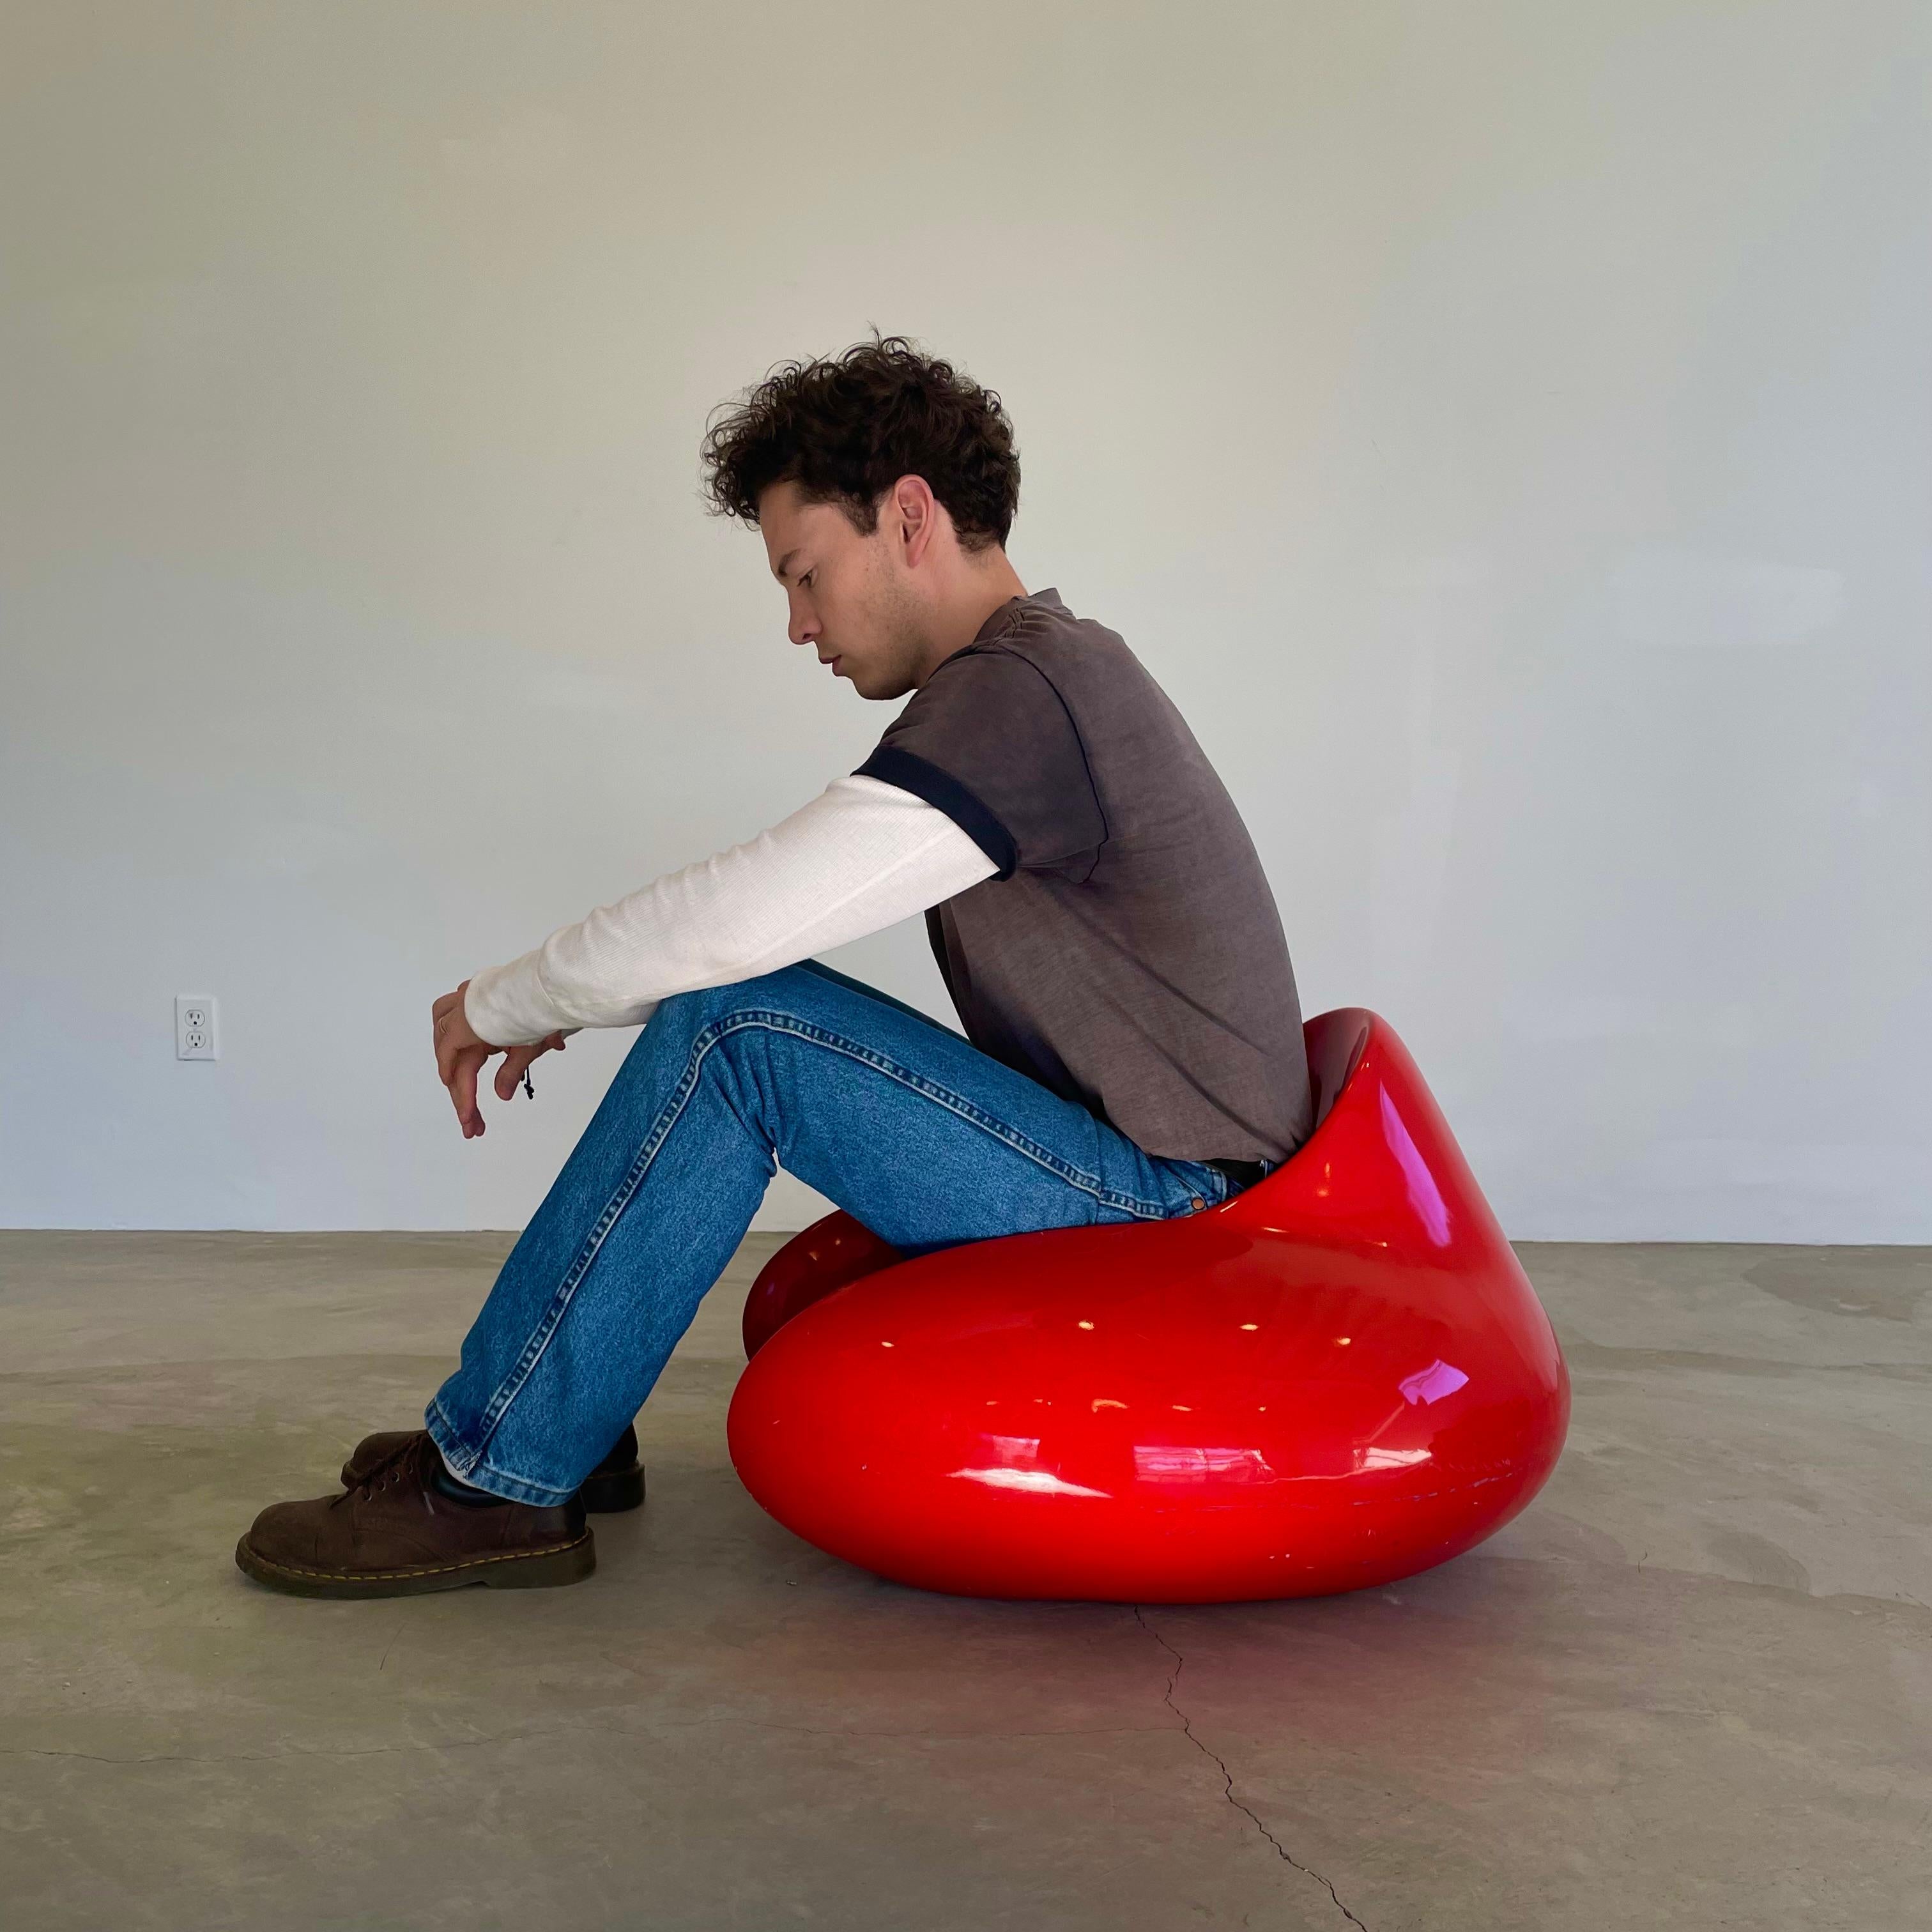 Unique fiberglass chair in the style of Eero Aarnio's Formula chair. Handmade and finished in candy apple red. Smooth lines and curves that shoot up forming a backrest and settle back seamlessly into the armrests. The seat rests low to the ground